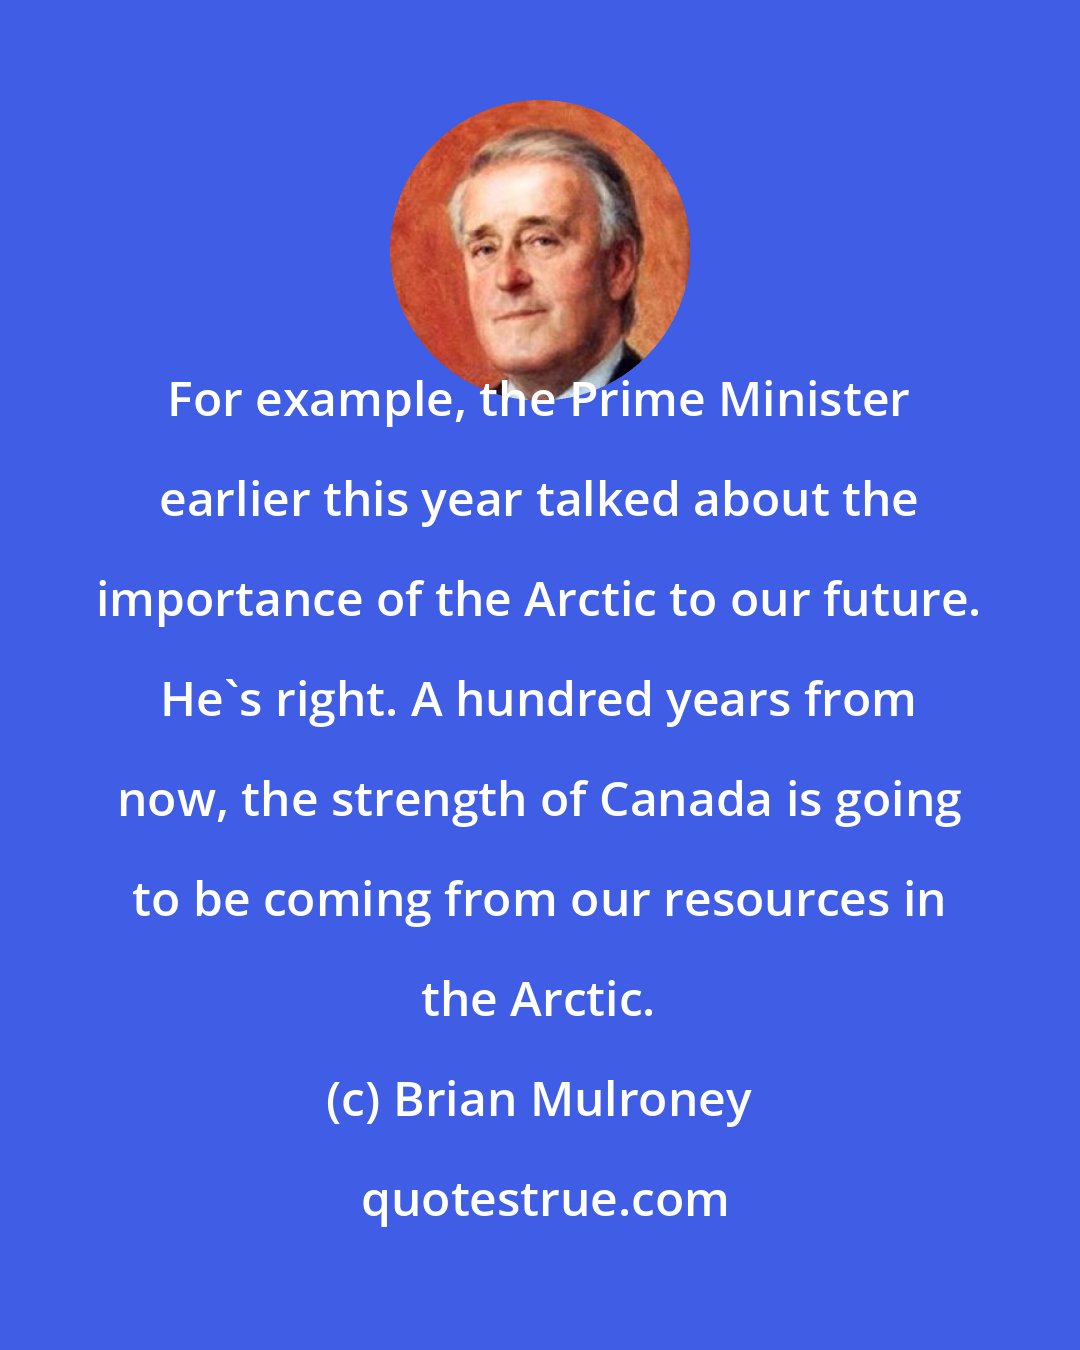 Brian Mulroney: For example, the Prime Minister earlier this year talked about the importance of the Arctic to our future. He's right. A hundred years from now, the strength of Canada is going to be coming from our resources in the Arctic.